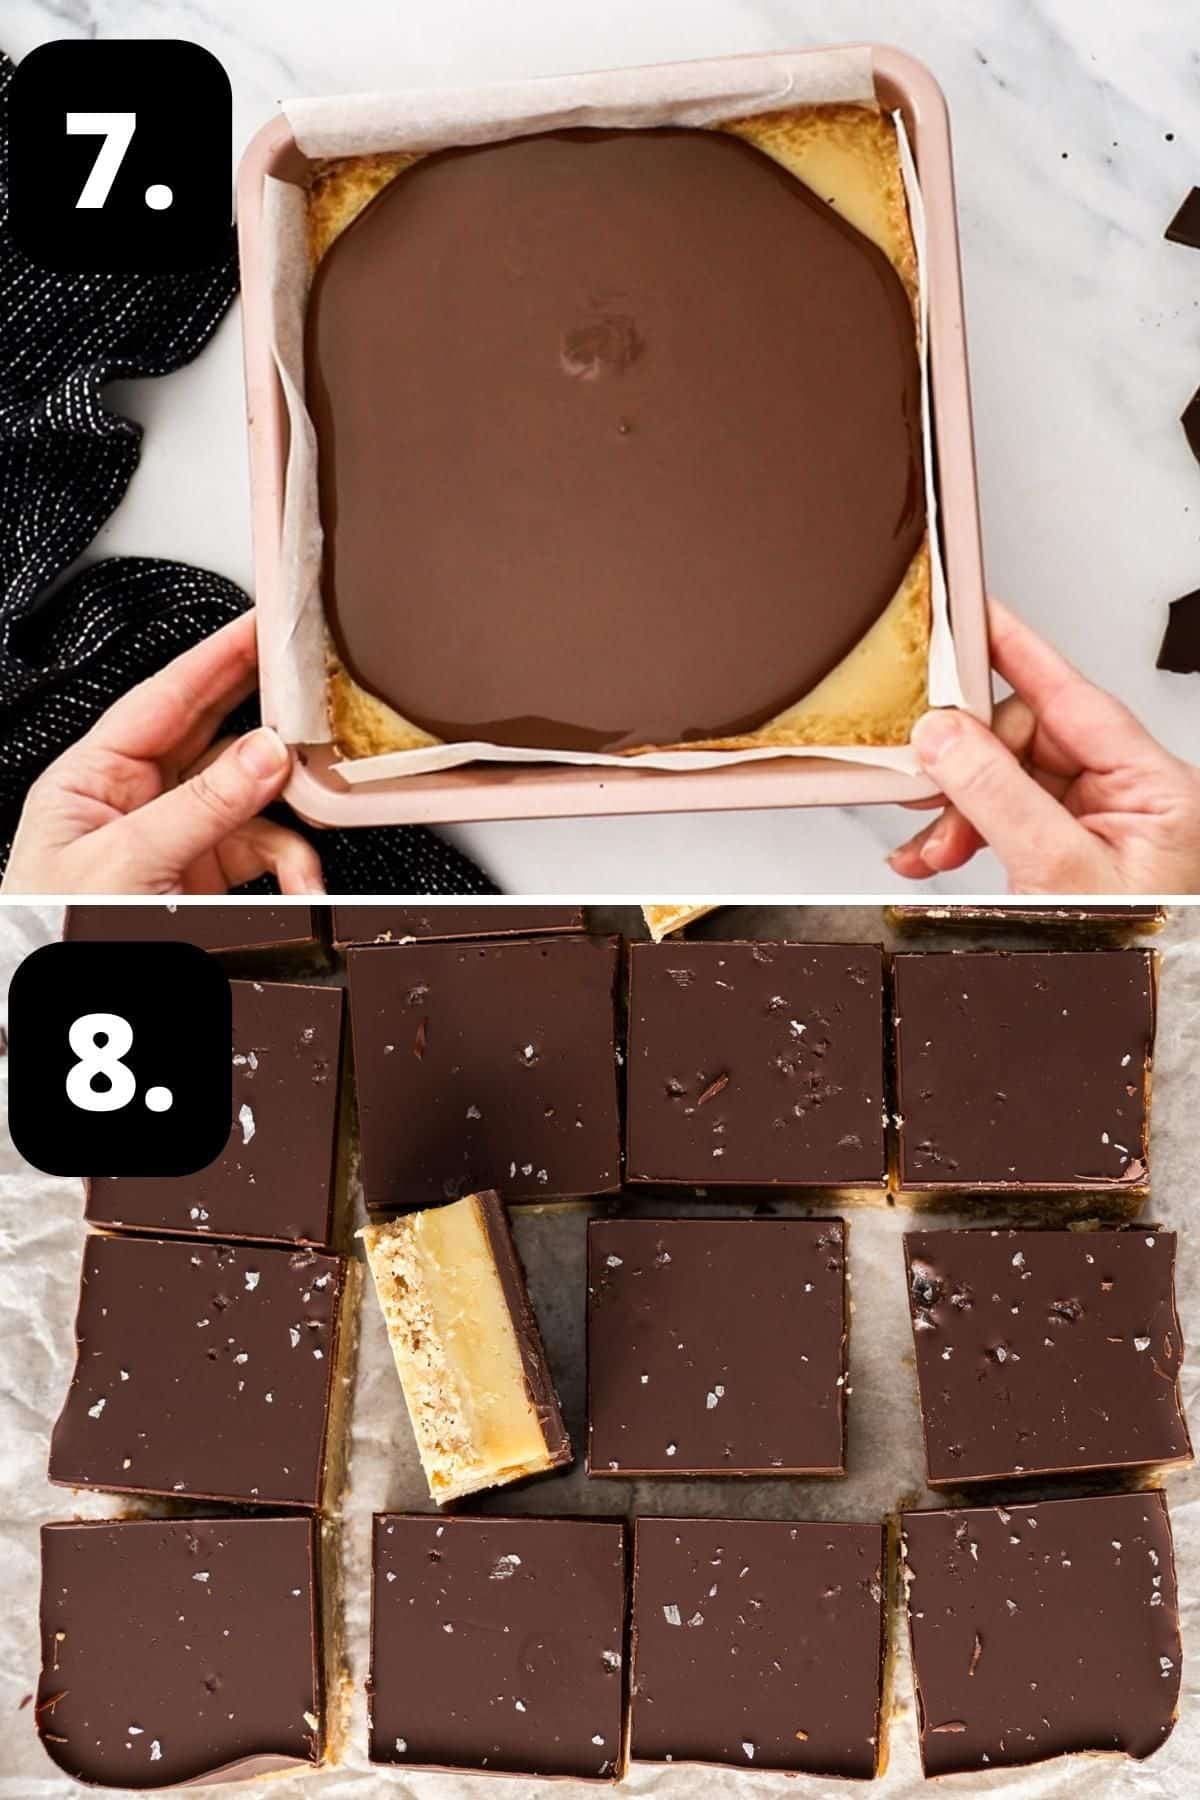 Steps 7-8 of preparing this recipe - coating the baked slice with melted chocolate and the slice cut into squares.